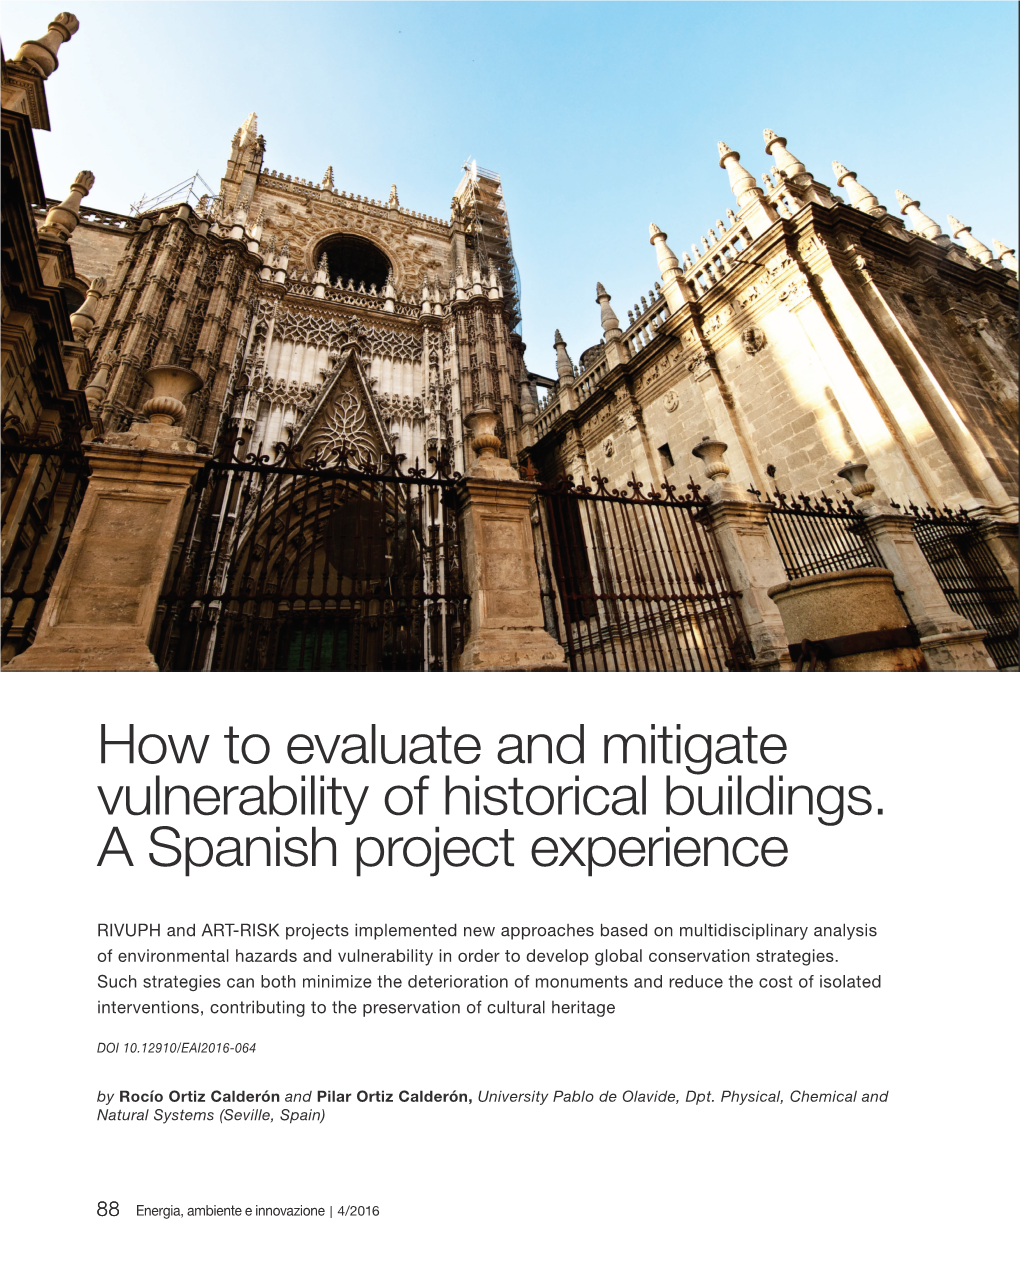 How to Evaluate and Mitigate Vulnerability of Historical Buildings